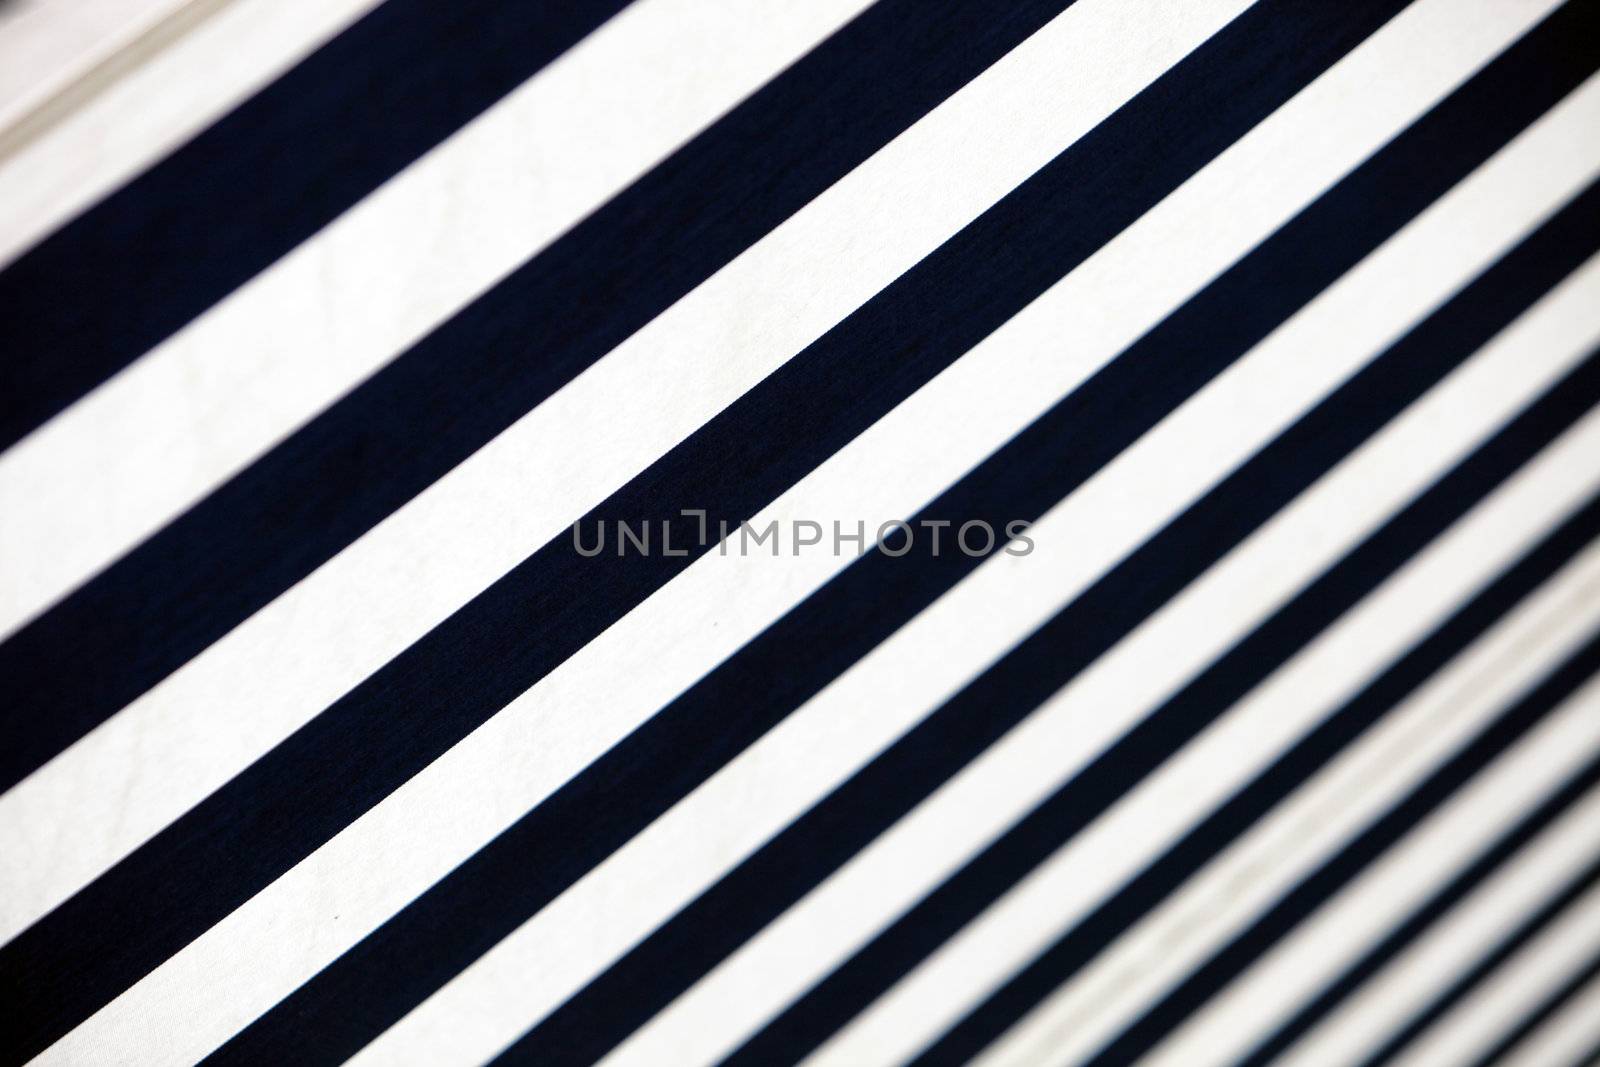 blue-white- striped awning - close-up by Farina6000